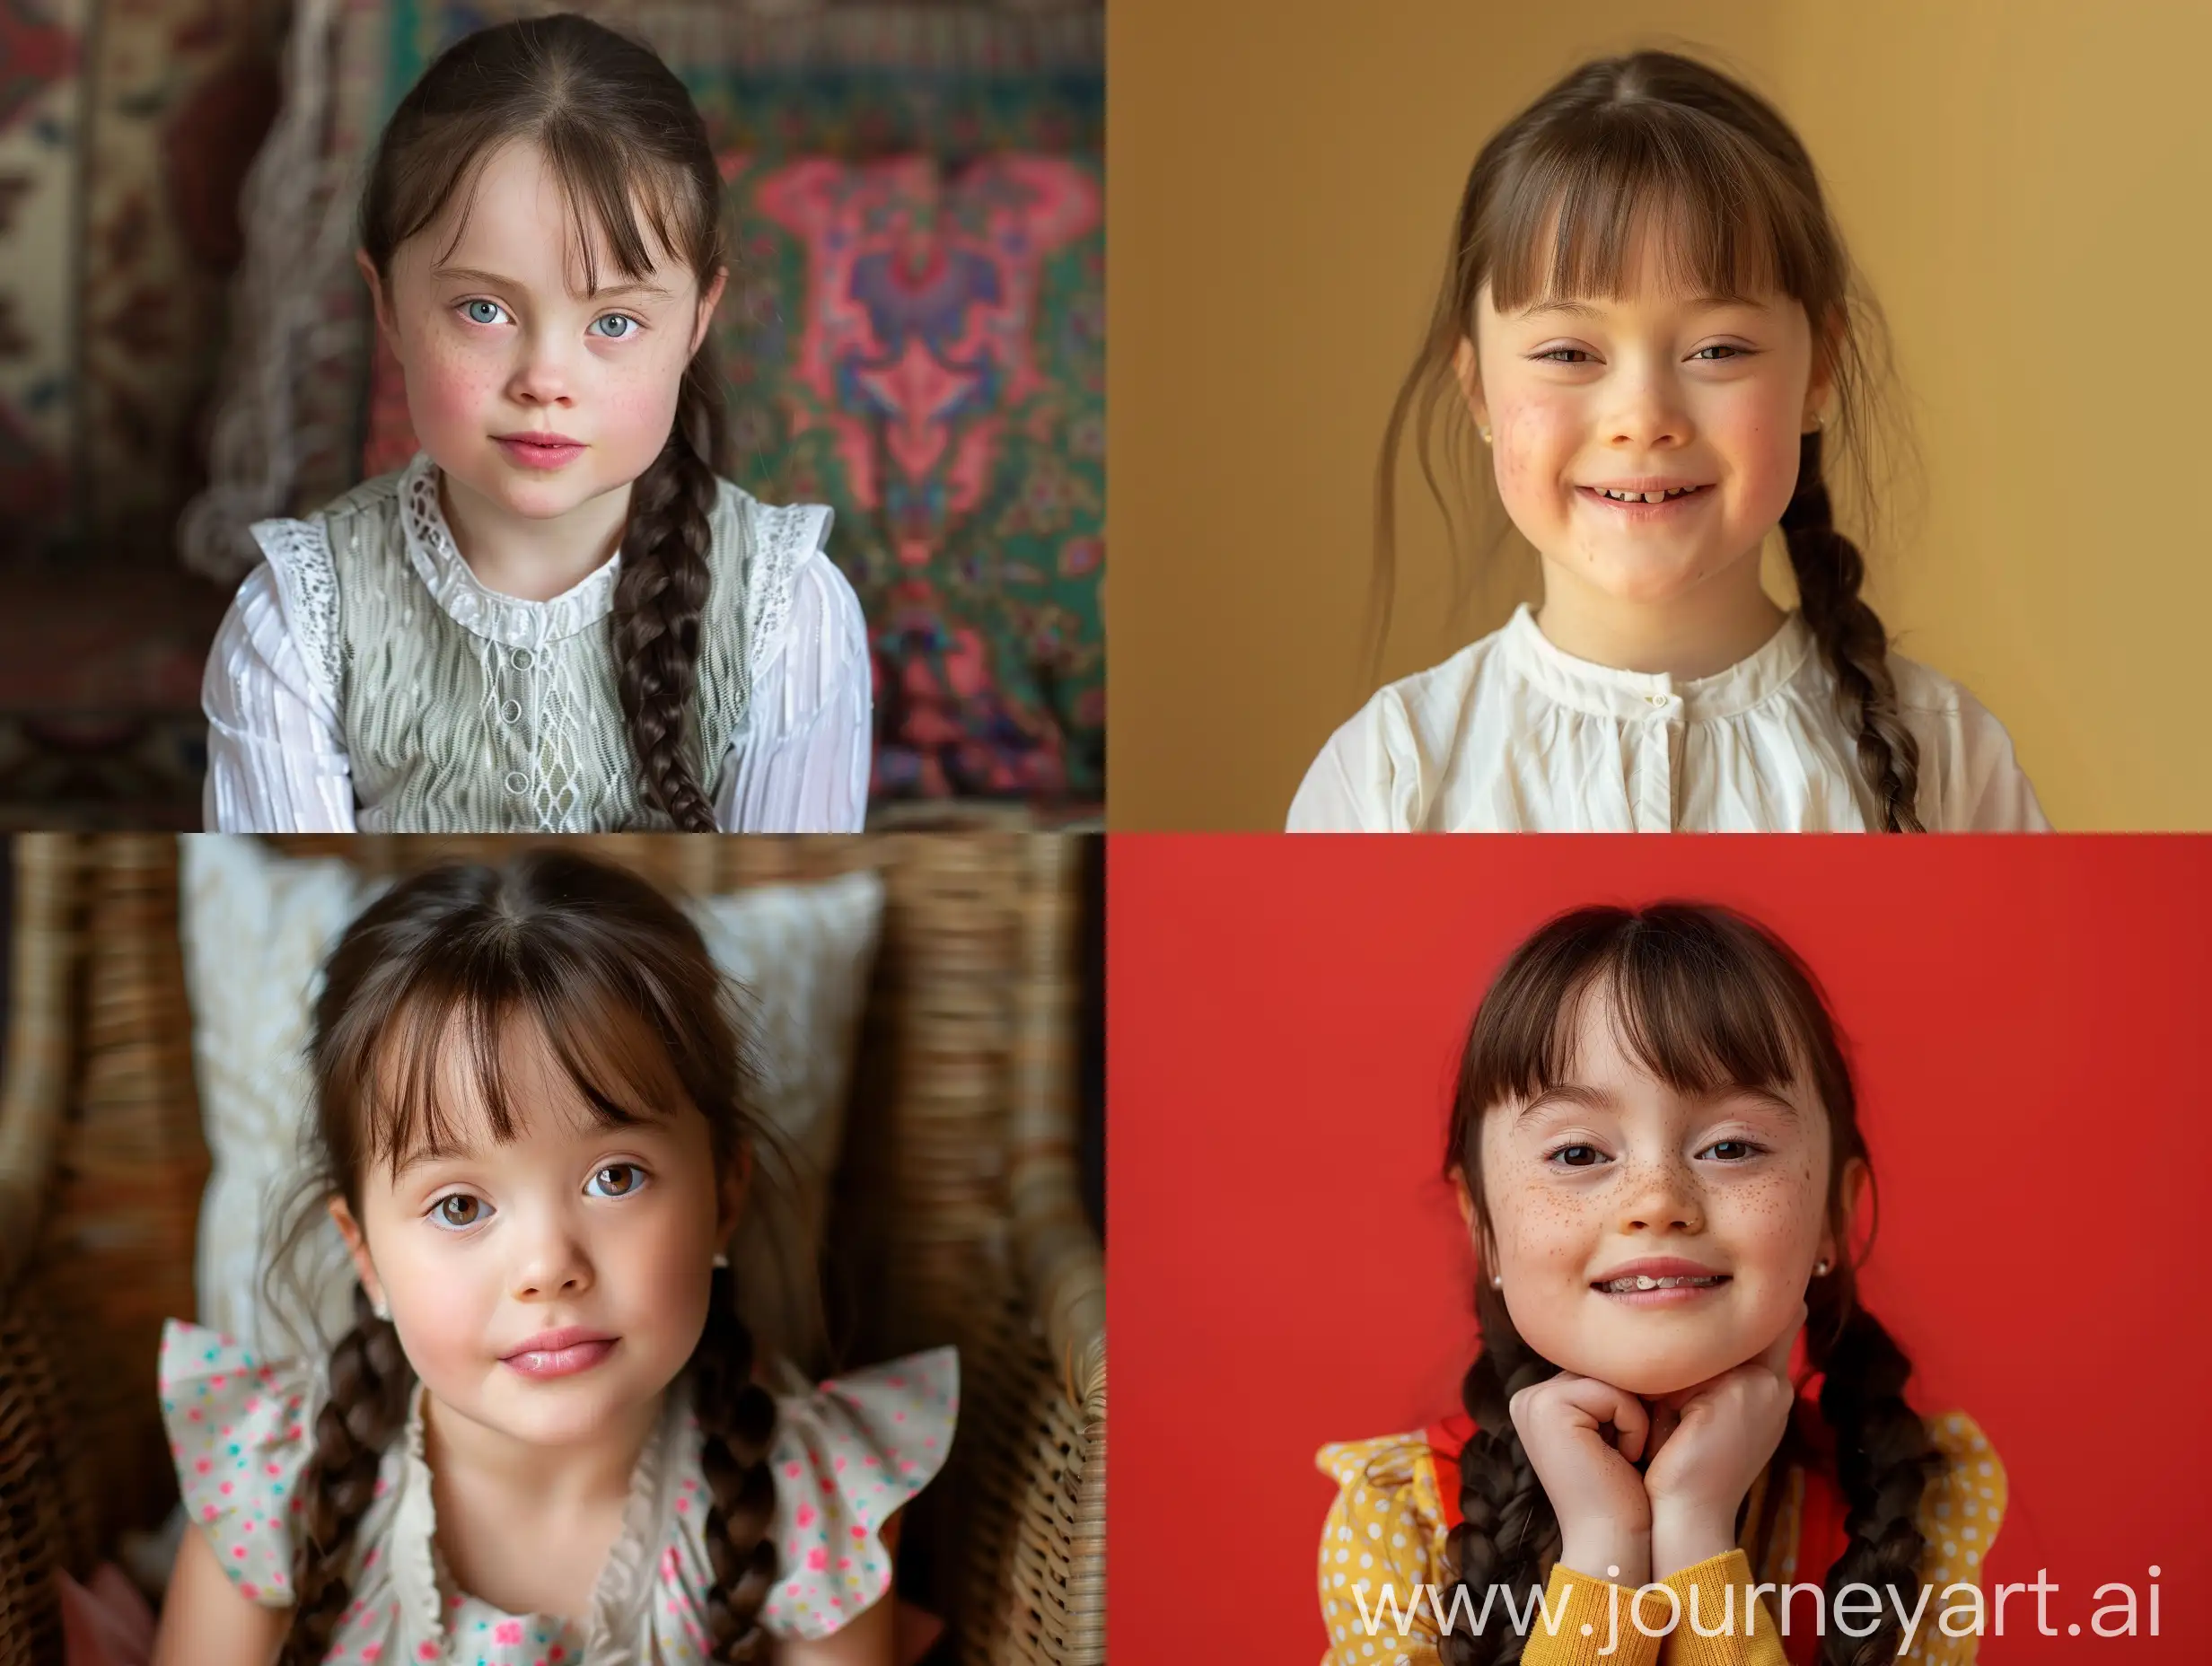 A girl with down syndrome.around 10 years old